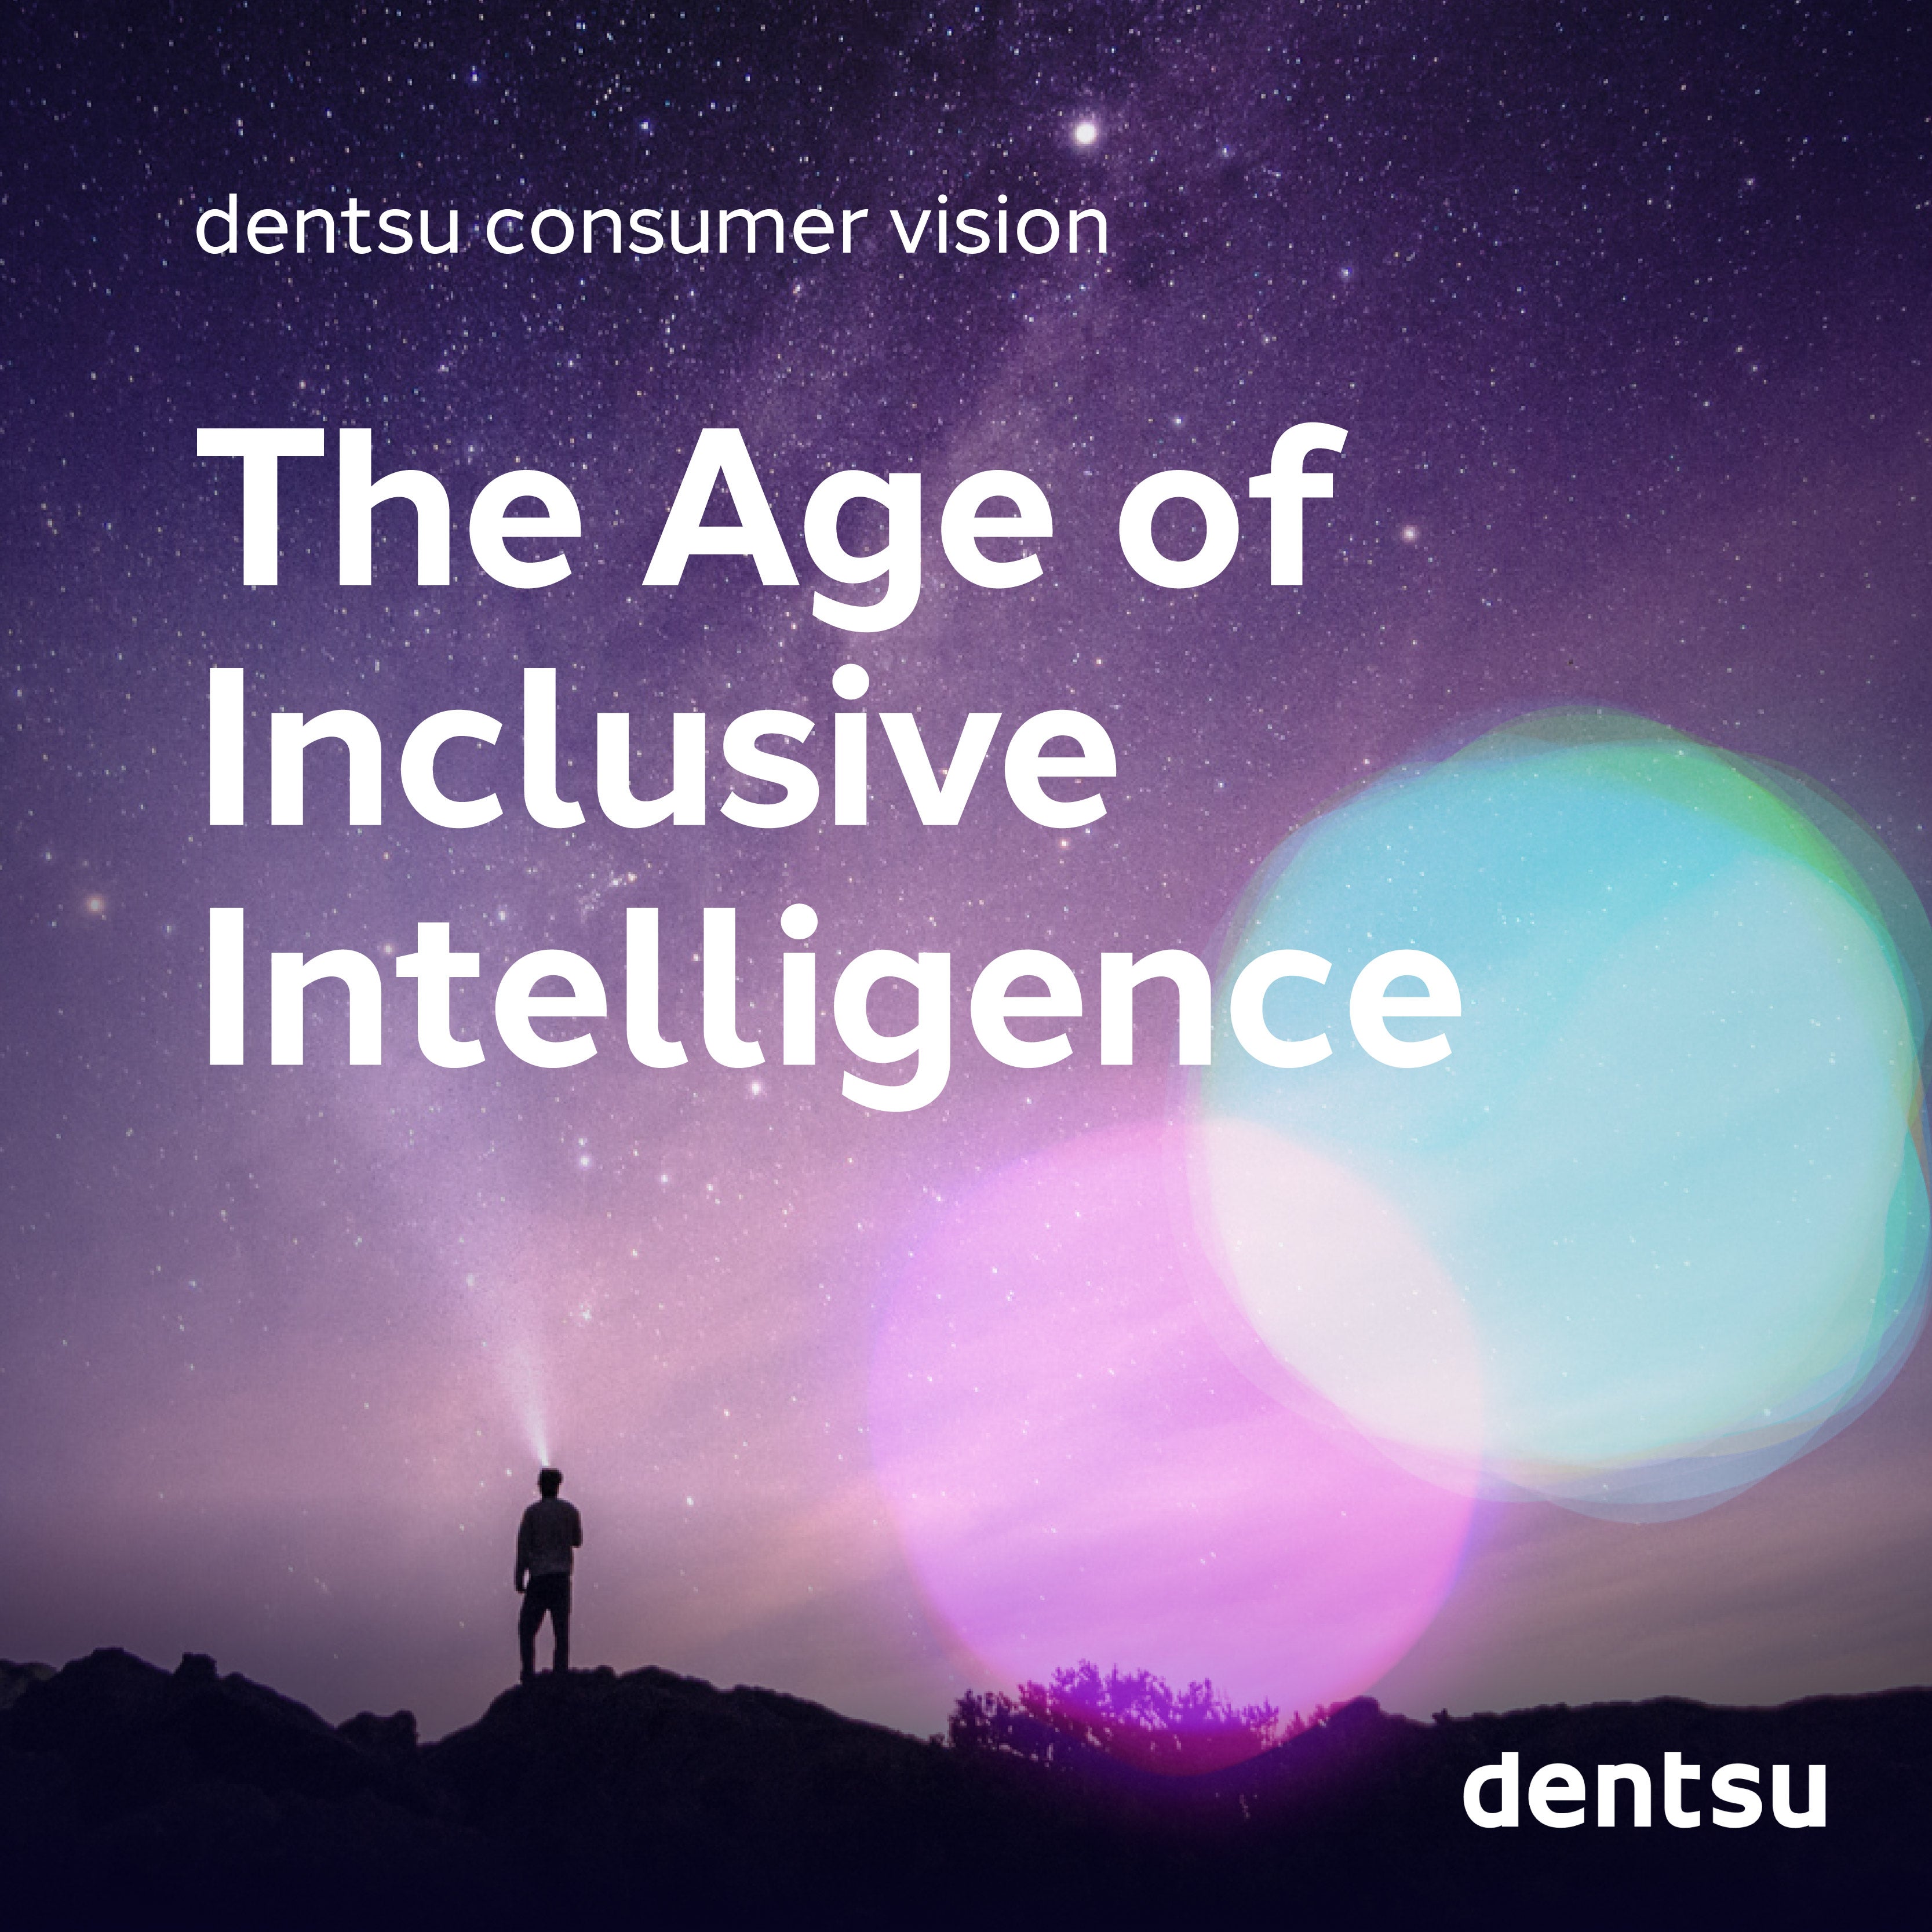 The Age of Inclusive Intelligence